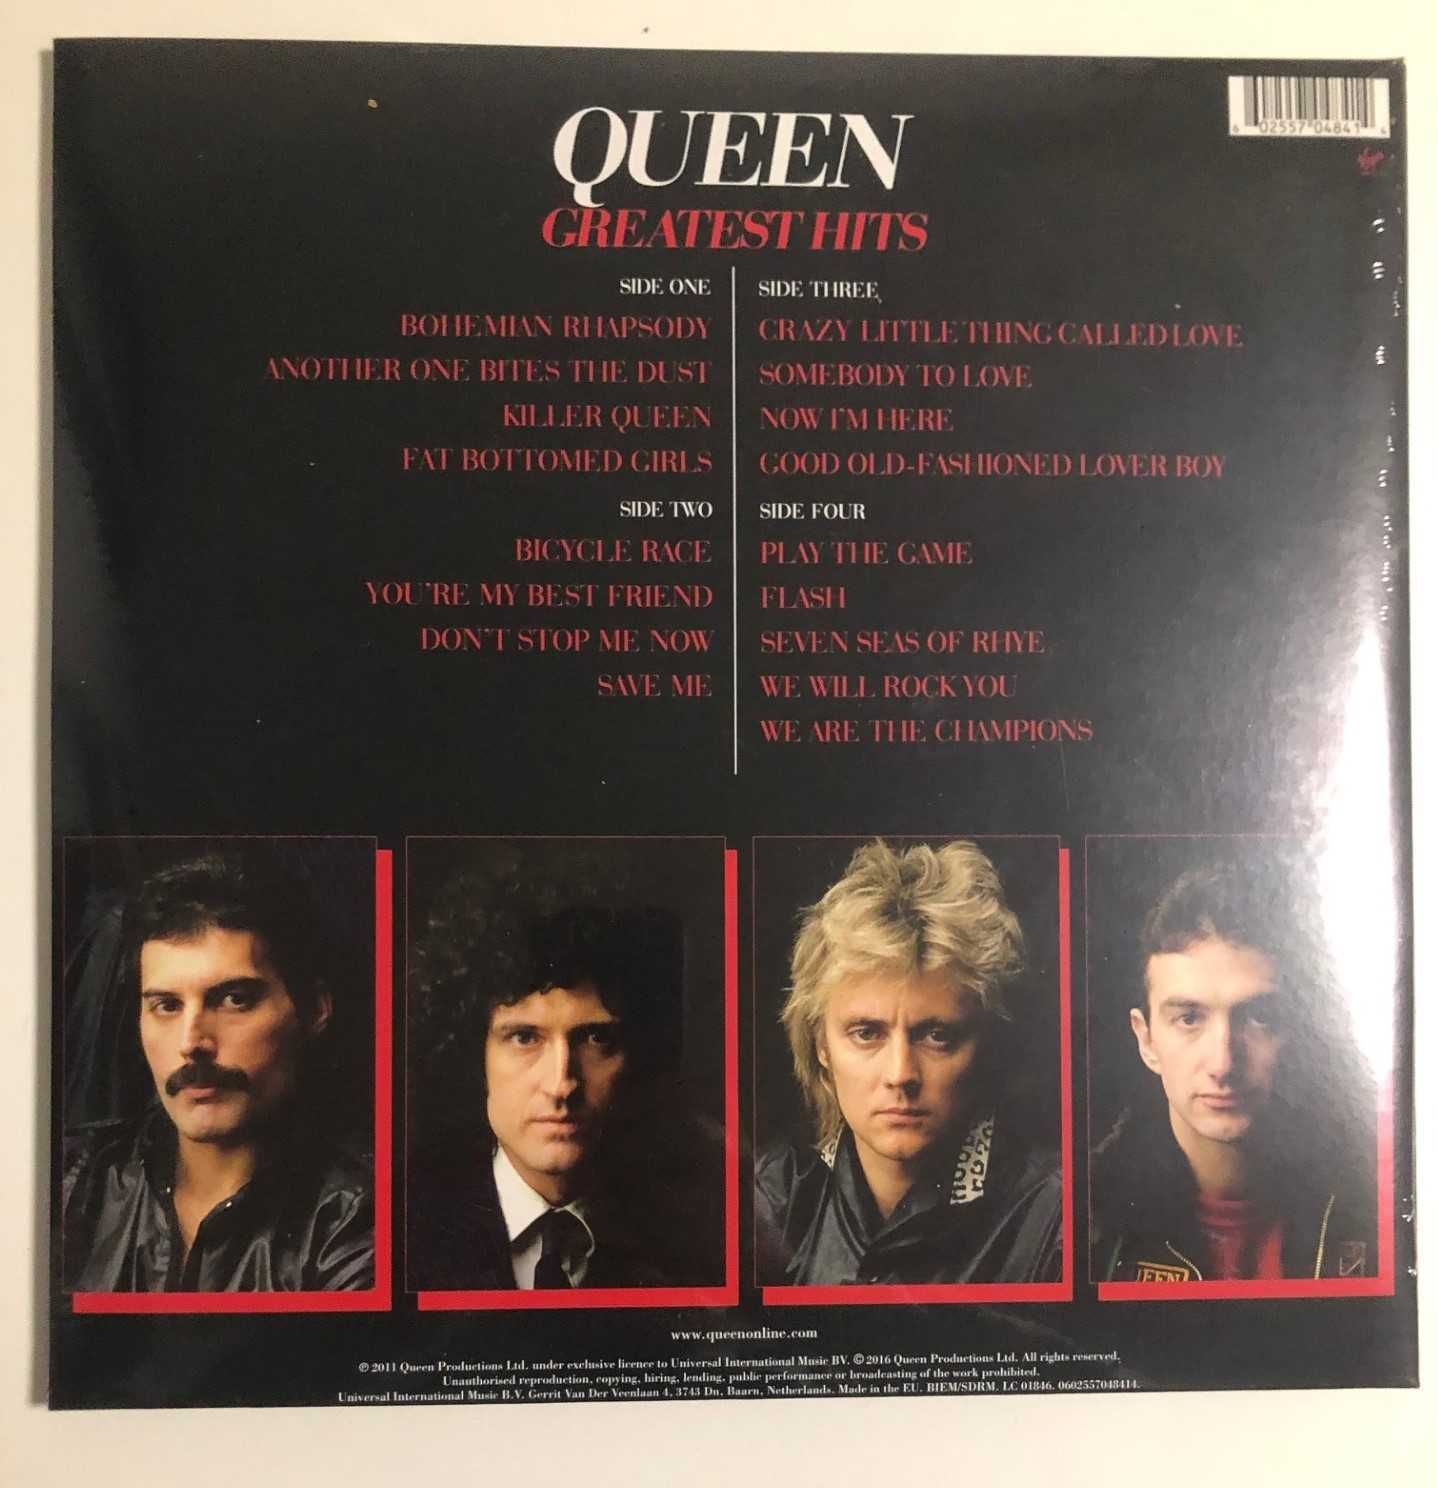 Quee Greatest Hits LP